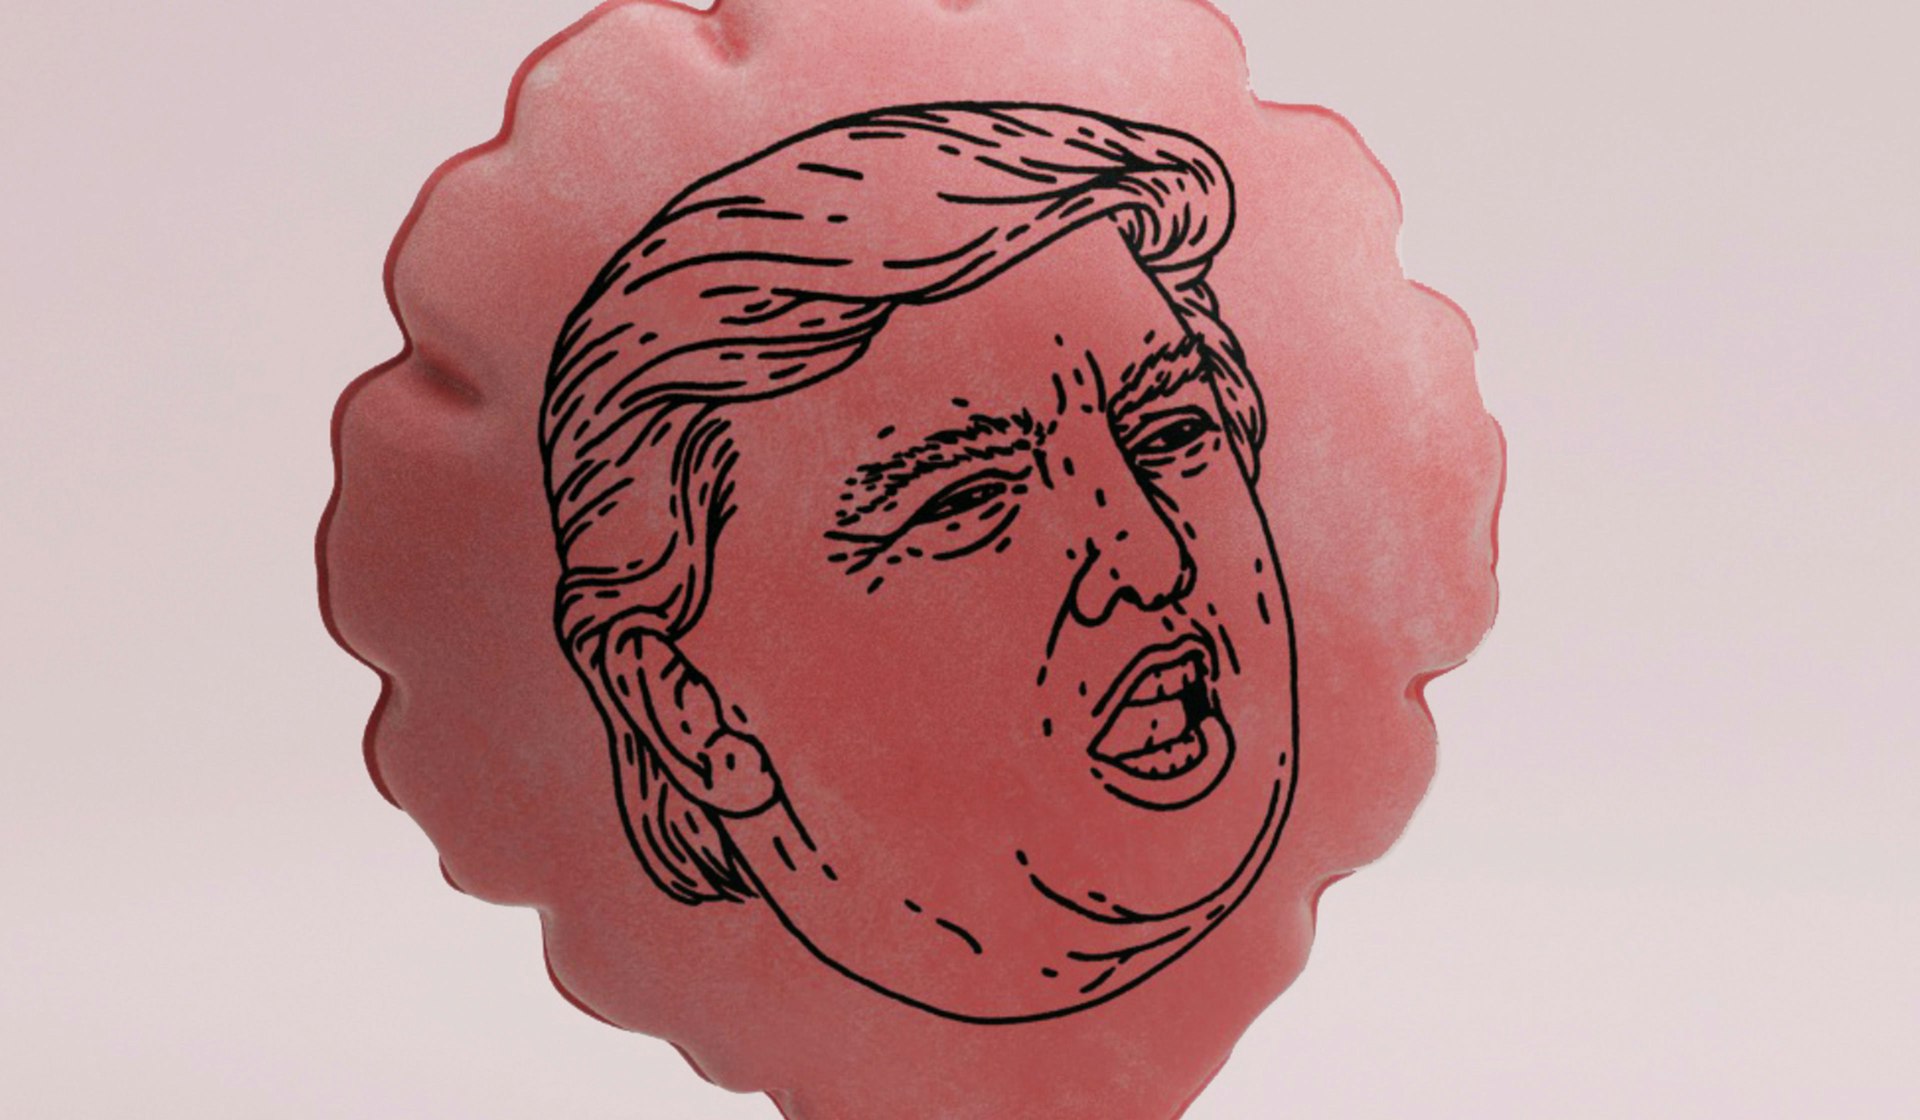 Put your rump on Donald Trump, for charity